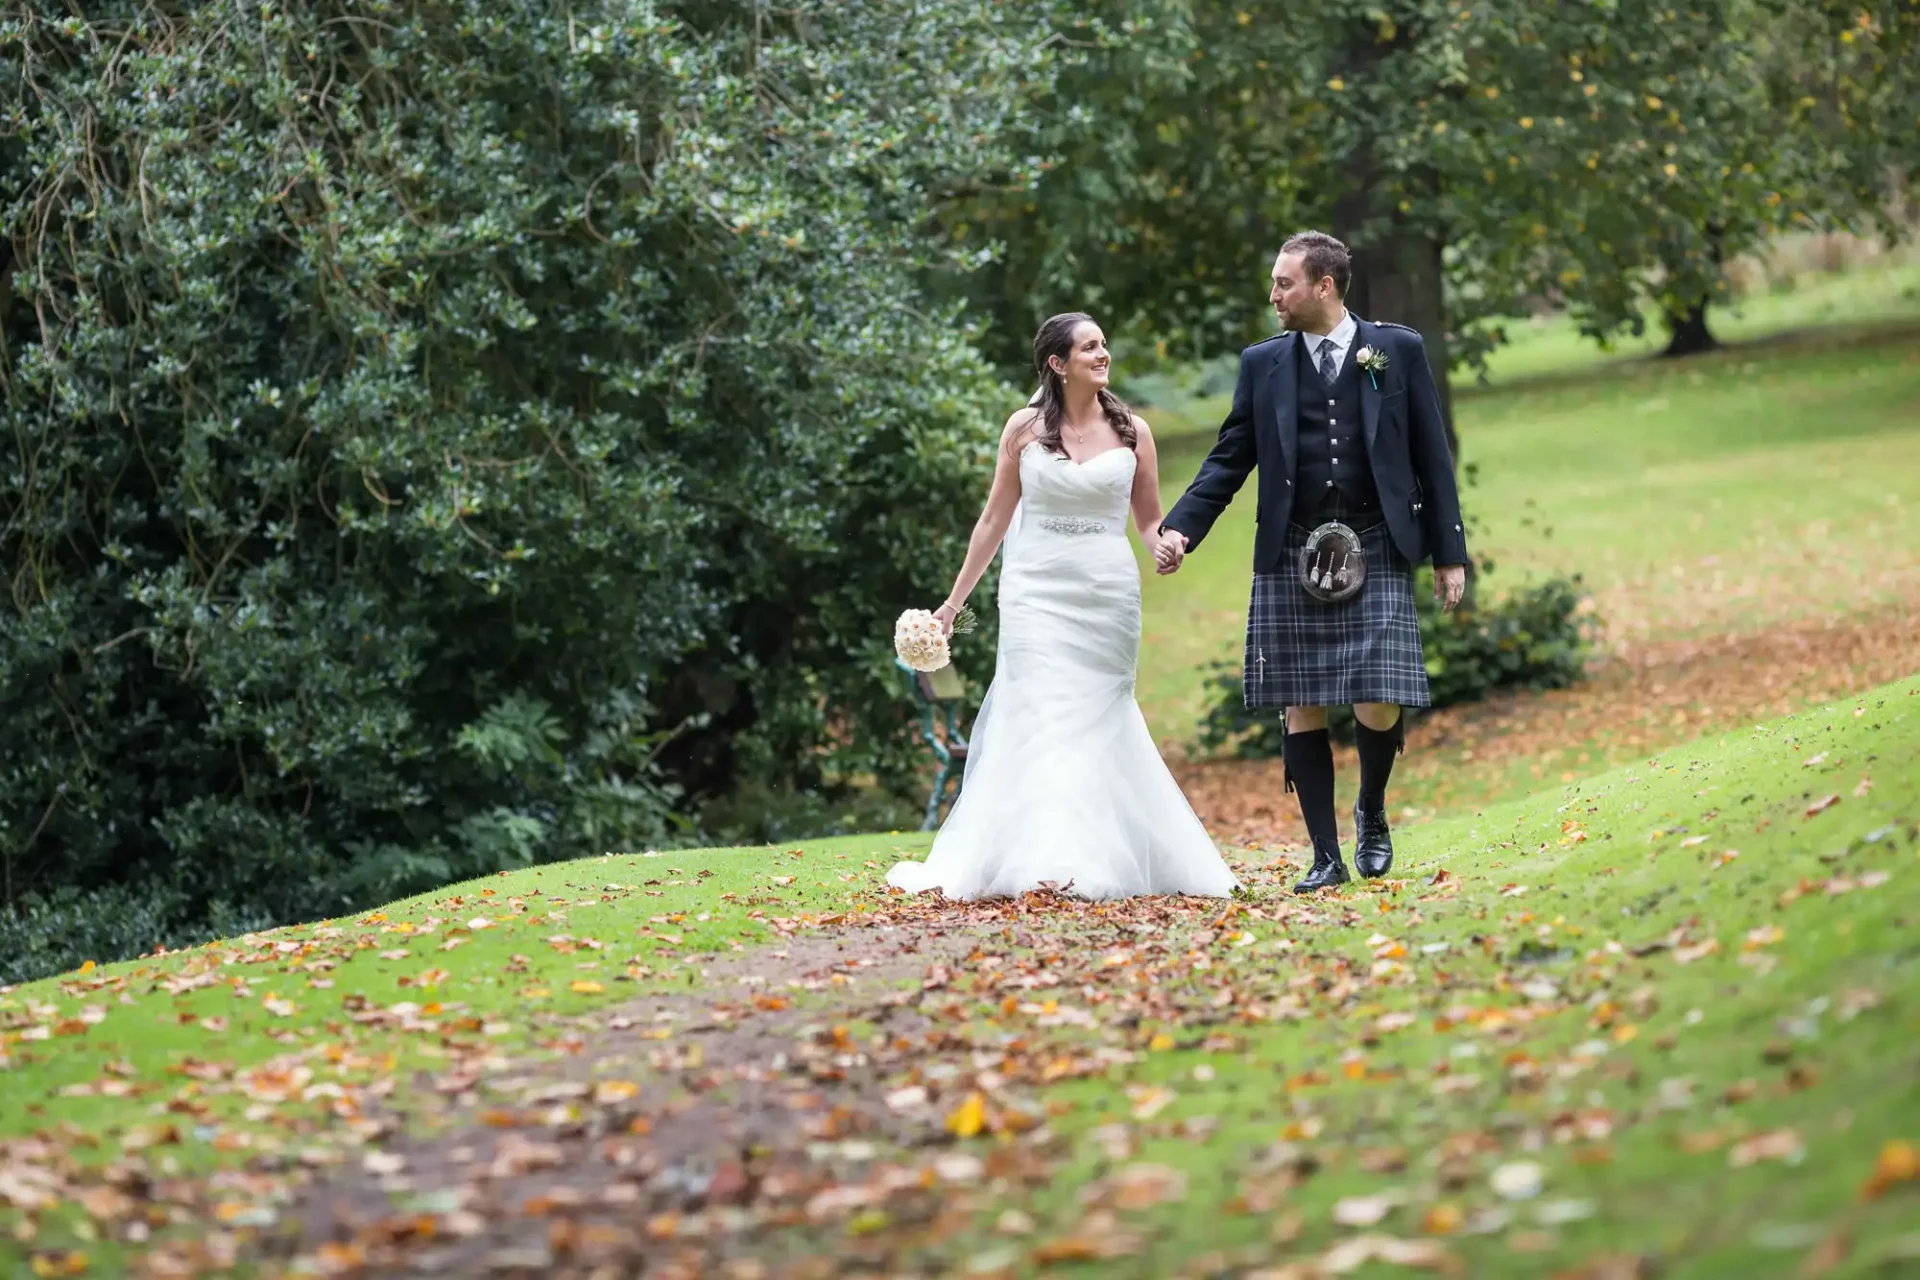 Bride in a white dress and groom in a kilt walking hand-in-hand down a leaf-strewn path in a park.